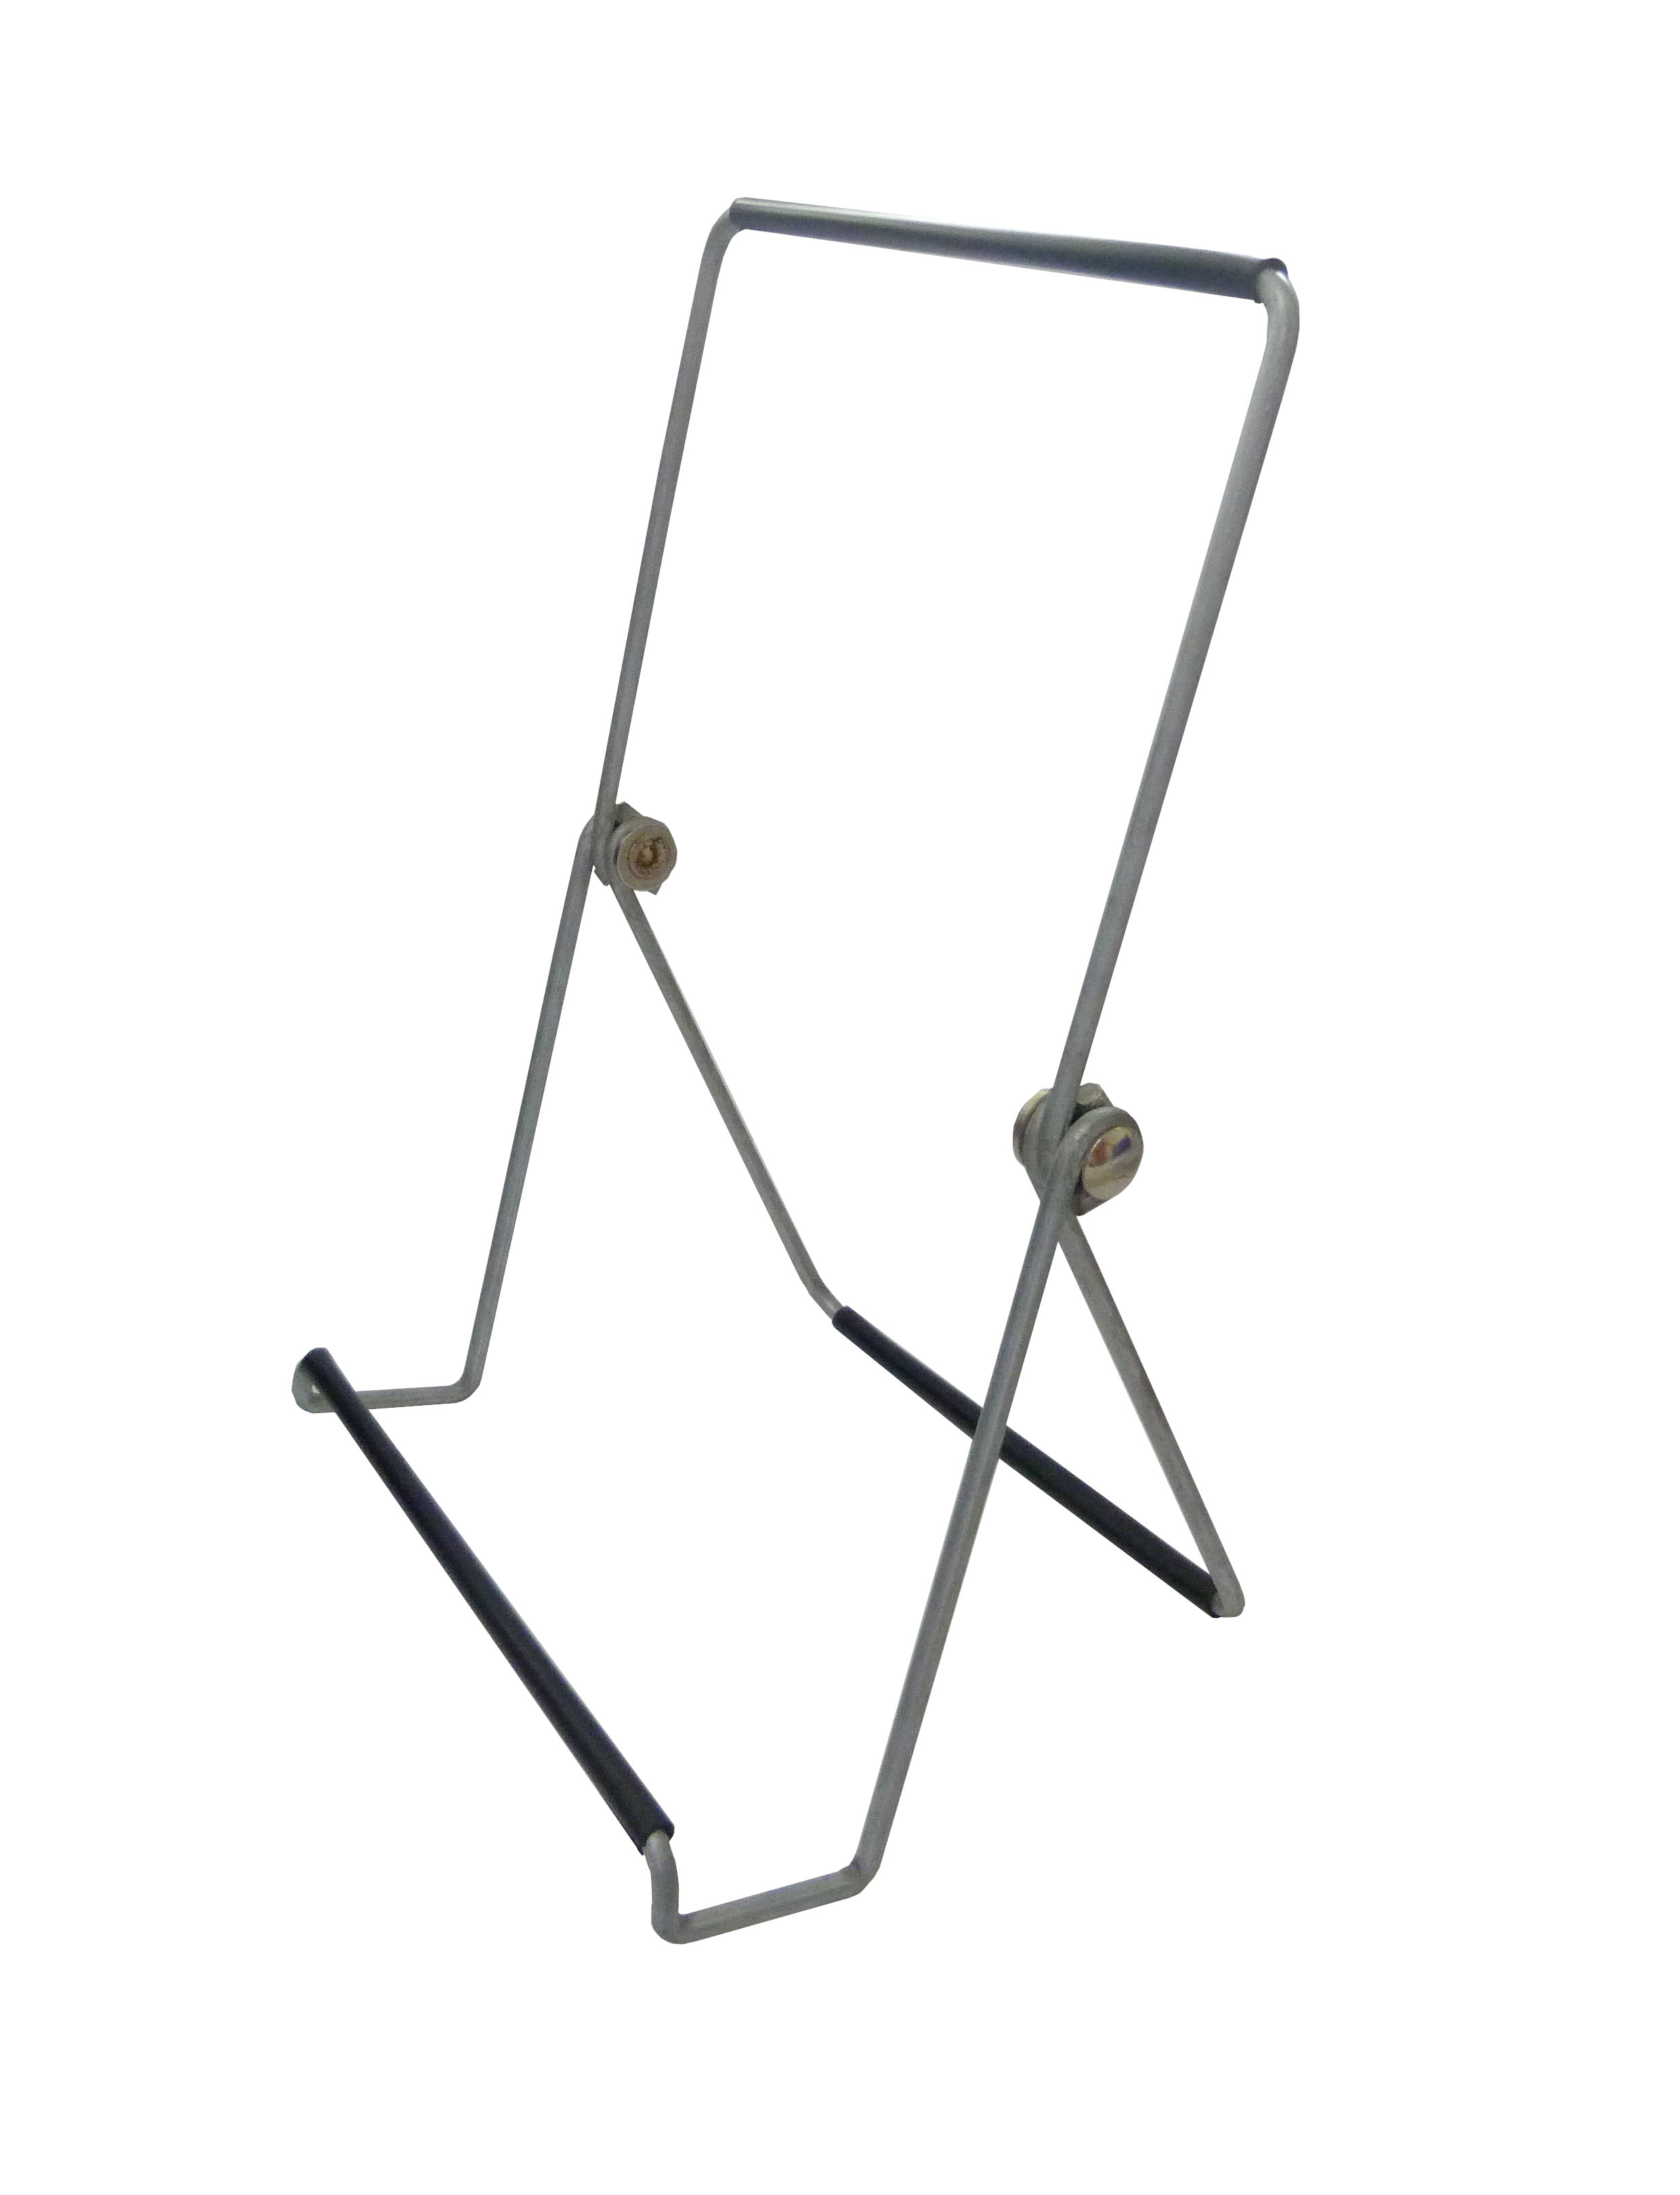 FixtureDisplays Wire Easel for Table Top with 1.2-inch Lip, Wide Base, 5-5/8 x 8-3/4, Foldable Design, for Books, Trophy Plaques, CDs